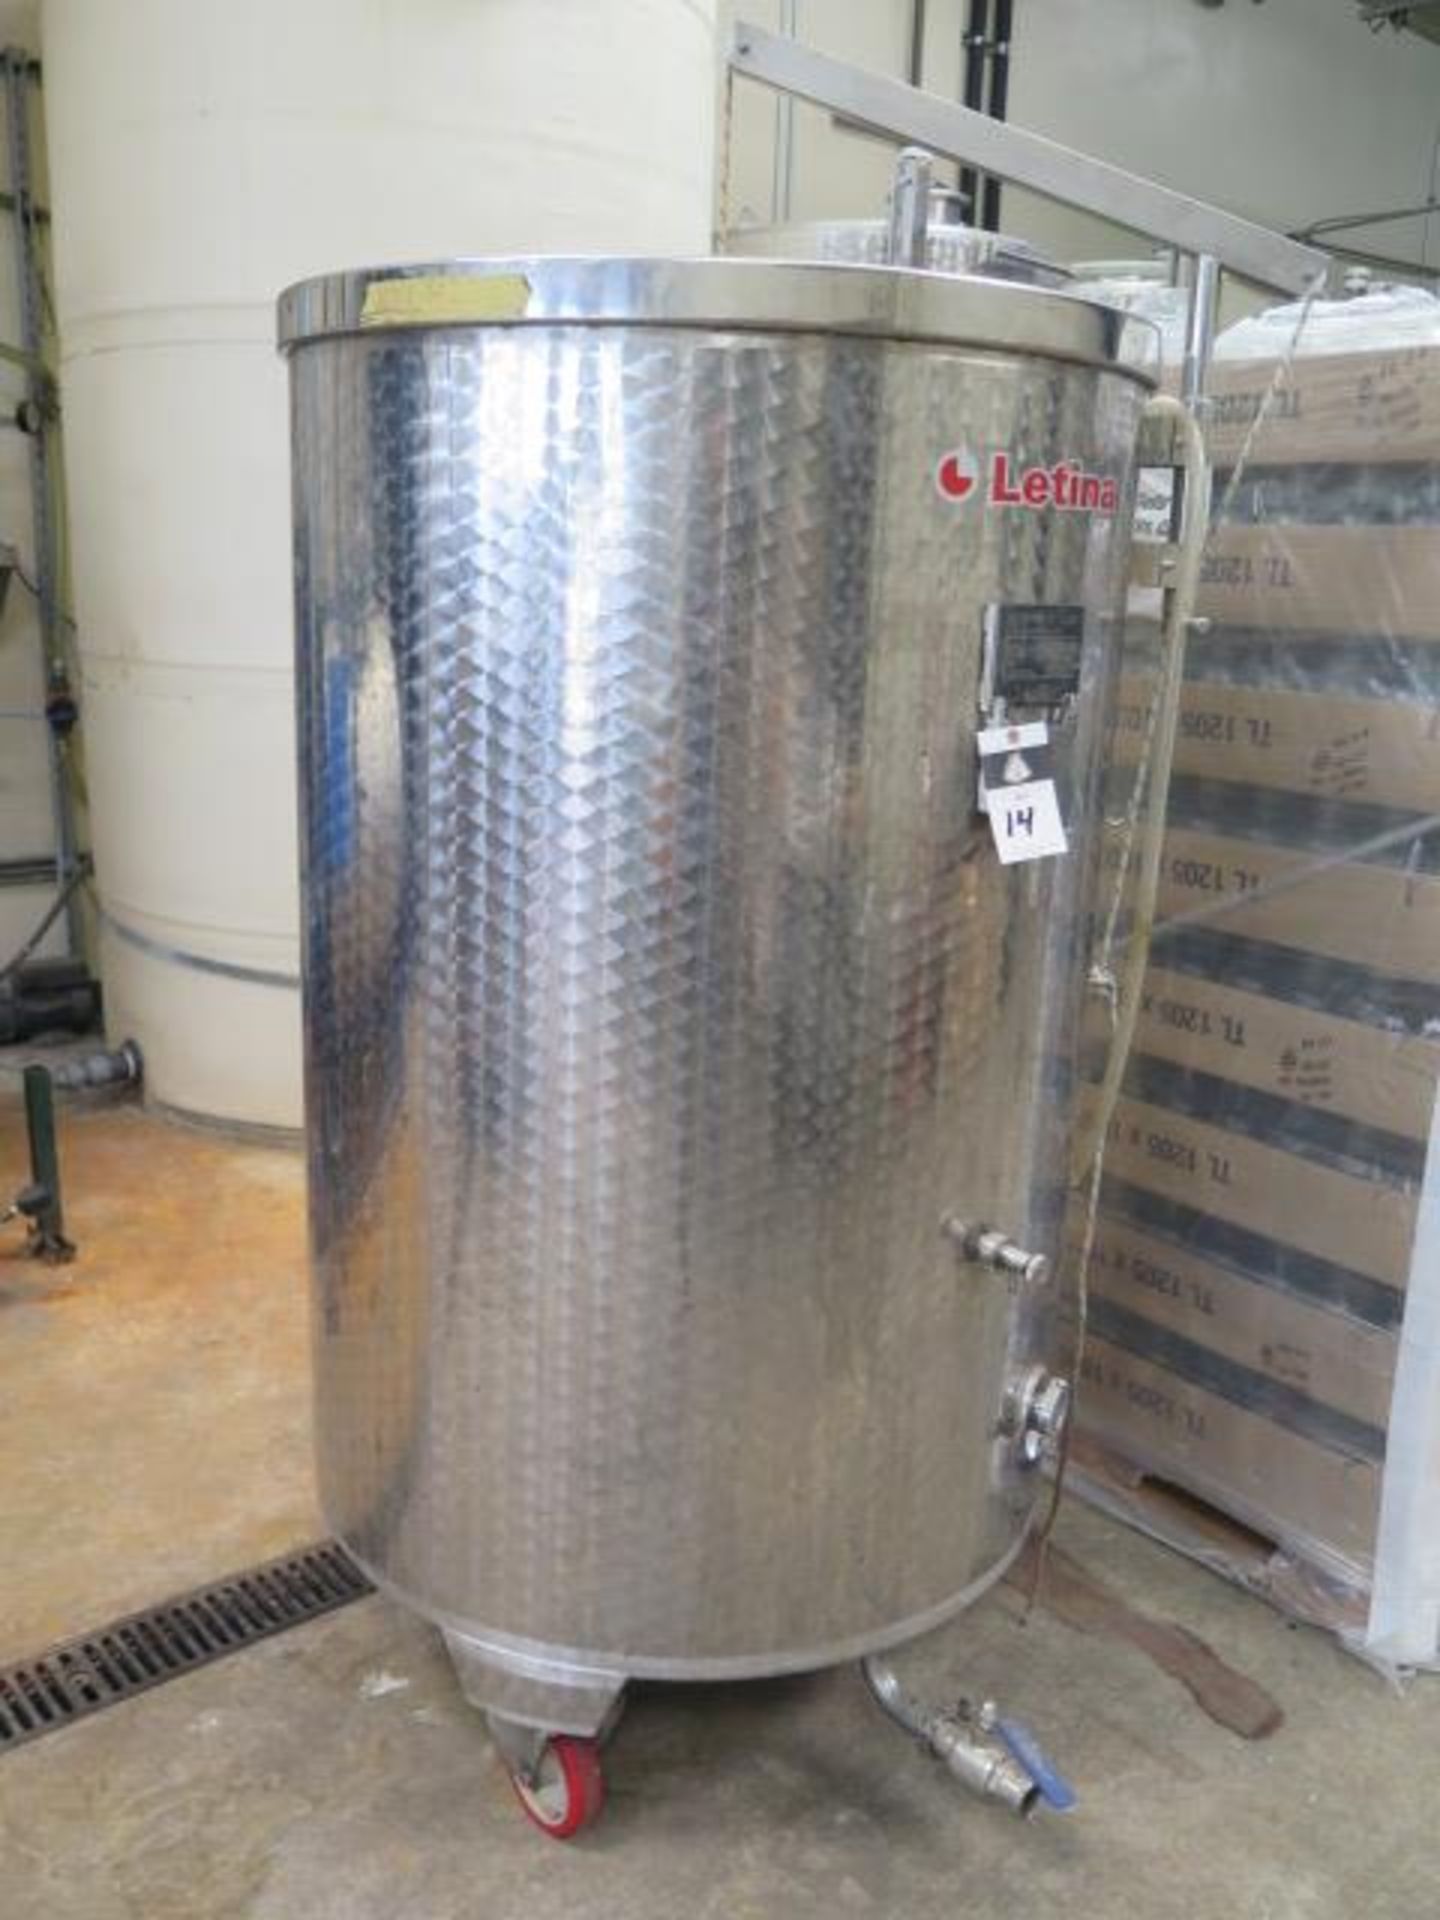 2015 Letina type PZ1000S10 1000 Liter Rolling Storage Tank s/n 006715/6 (SOLD AS-IS - NO WARRANTY) - Image 2 of 12